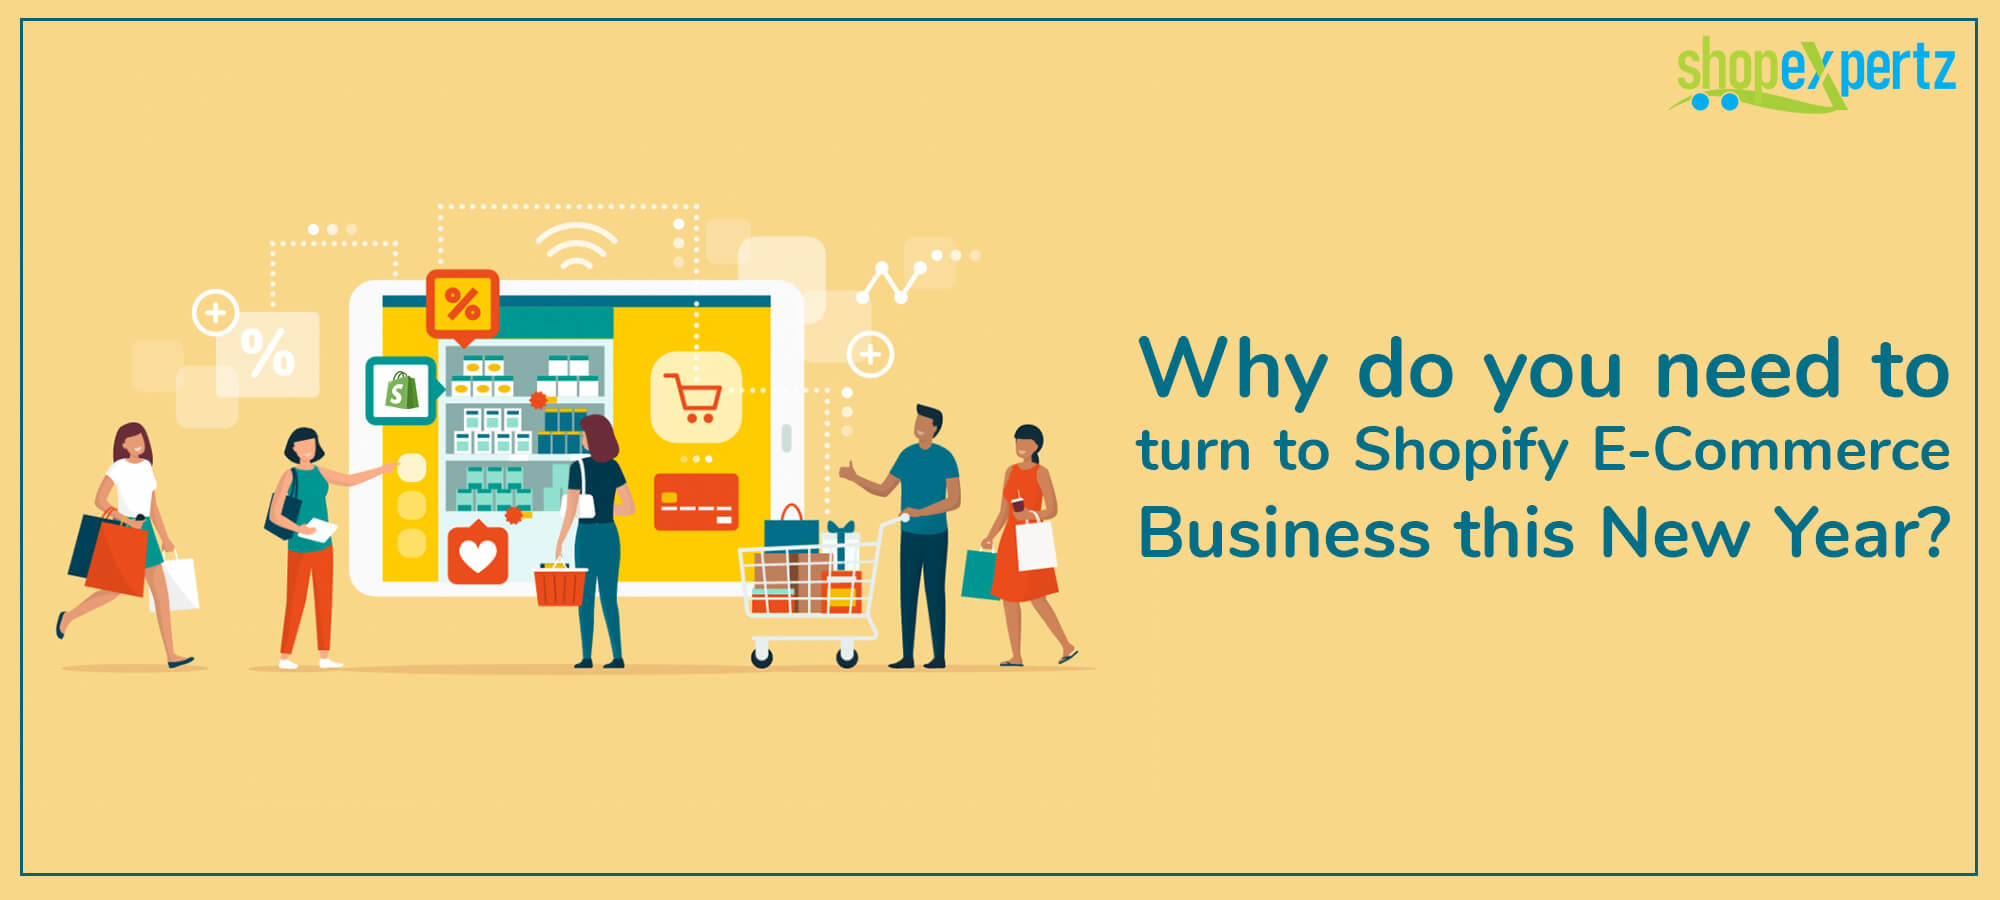 Why do you need to turn to Shopify E-Commerce Business this New Year?